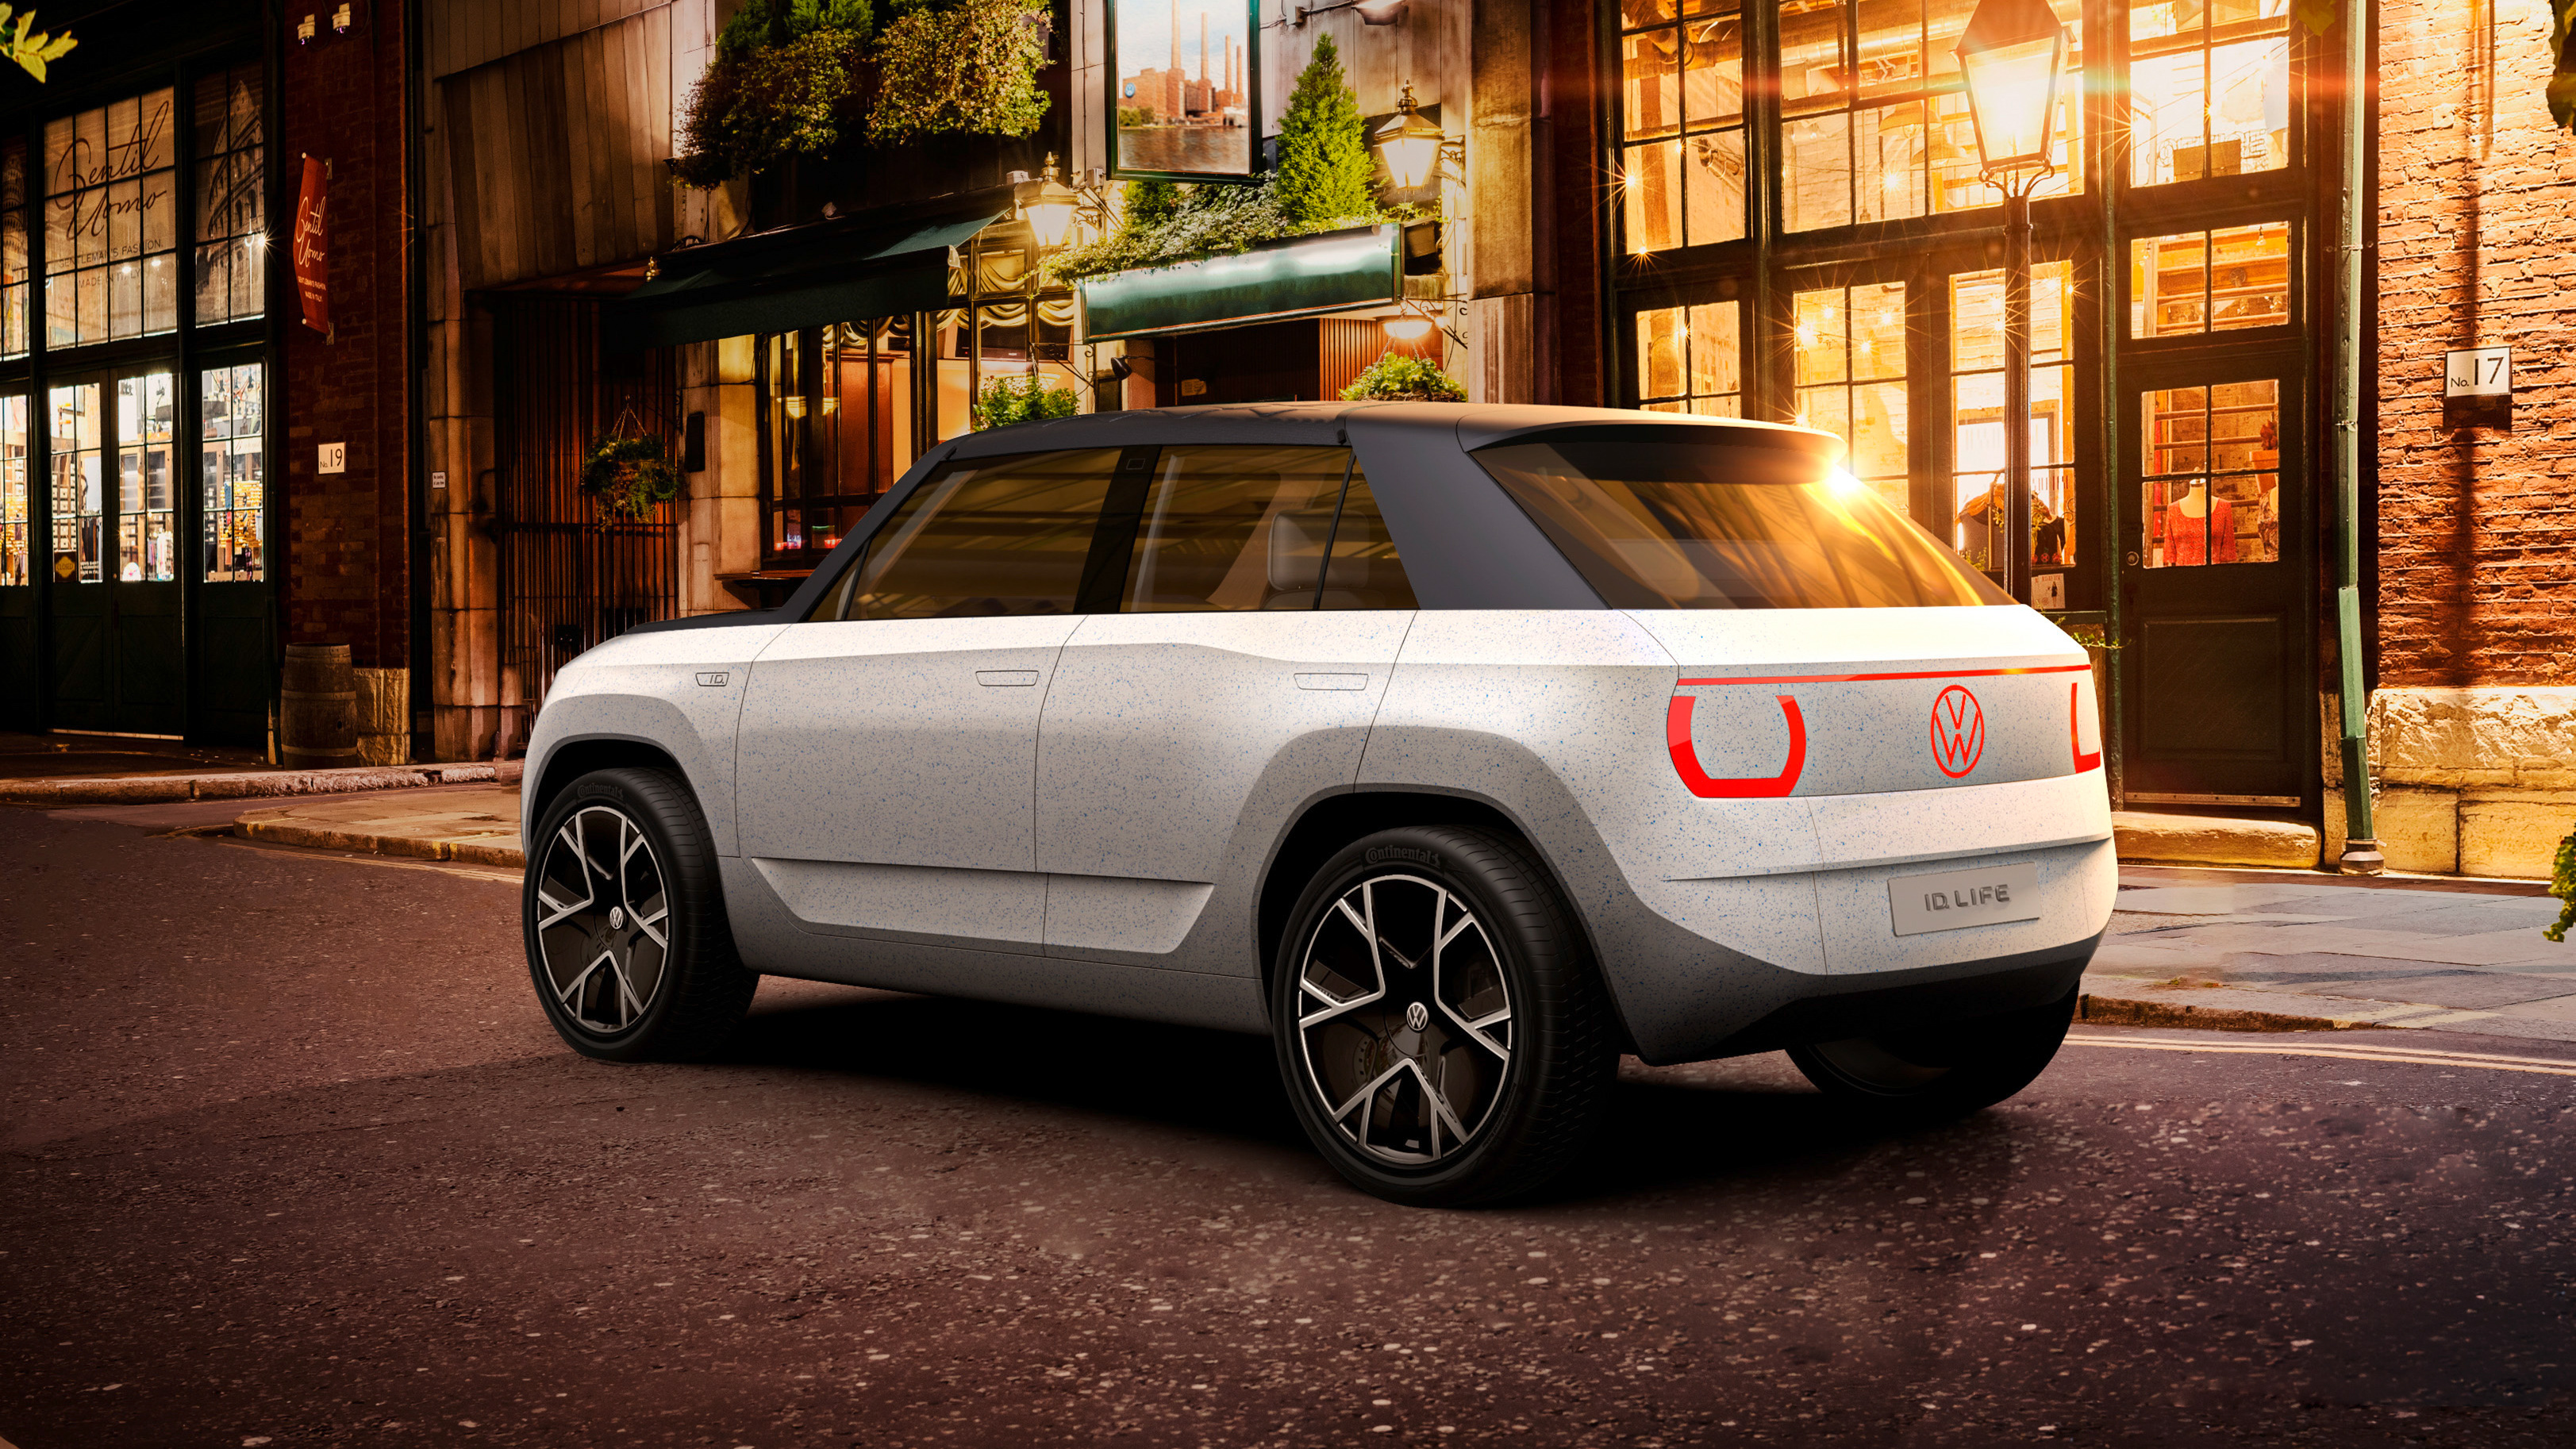 VW says the ID.LIFE concept parked in a street